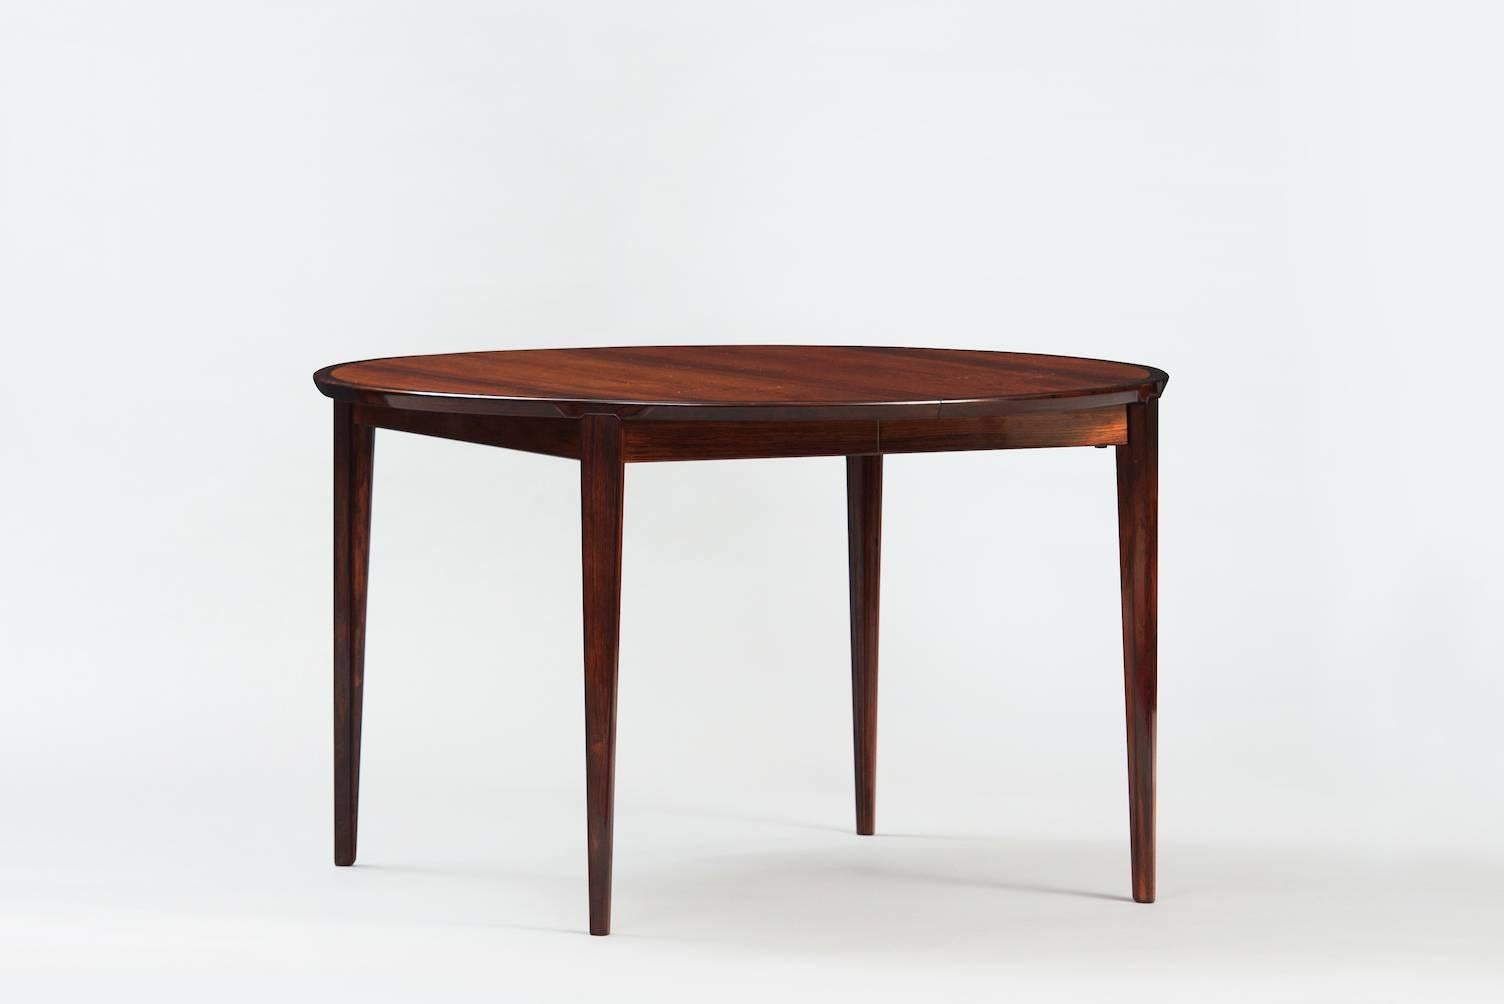 Rosewood extendible dining table with two leaves, one of the leaves folds into the inside of the table.